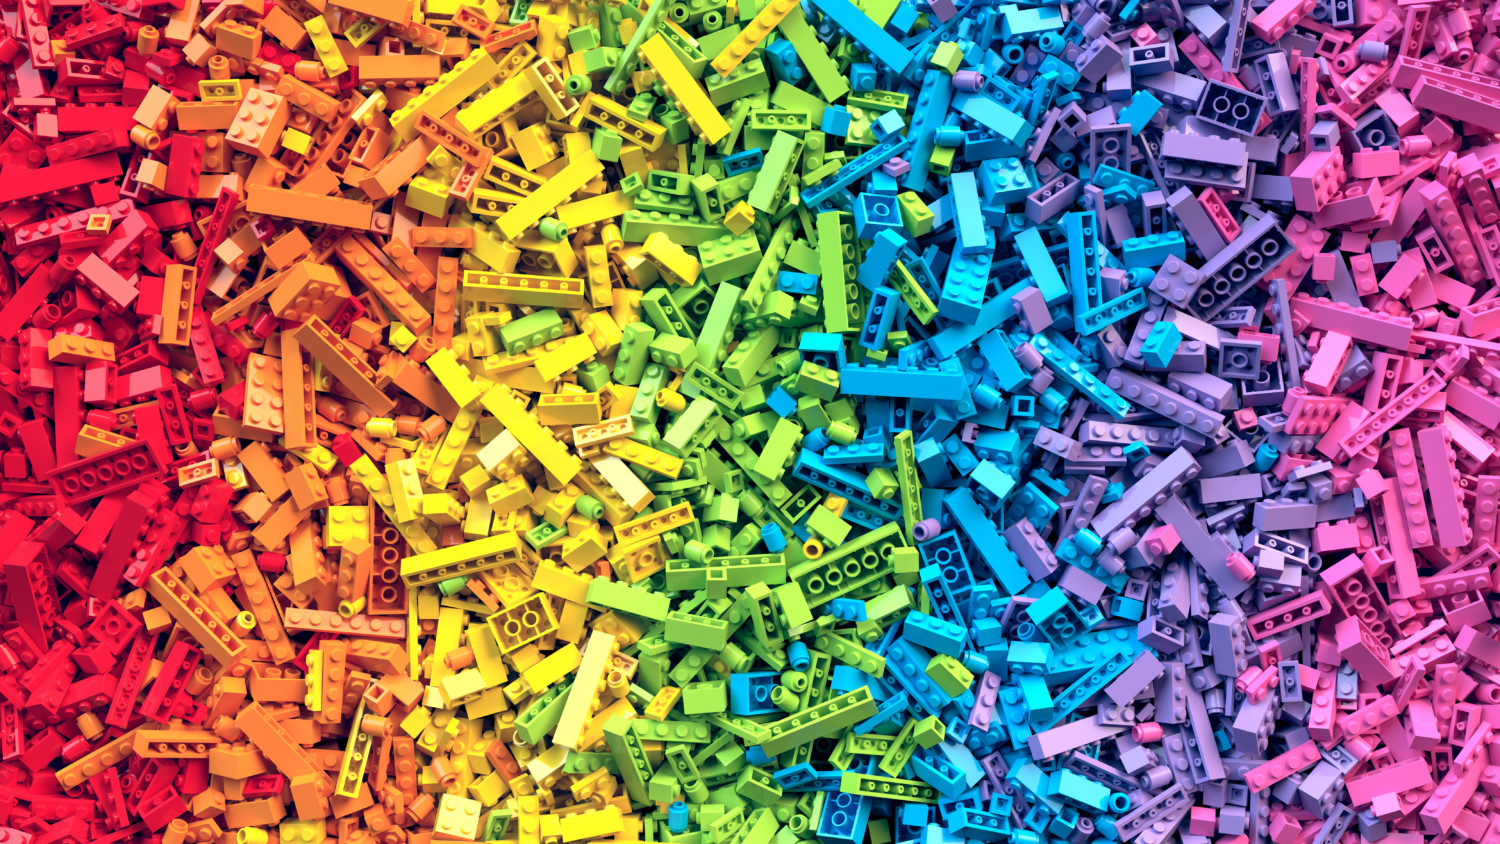 Legos in a rainbow of colors